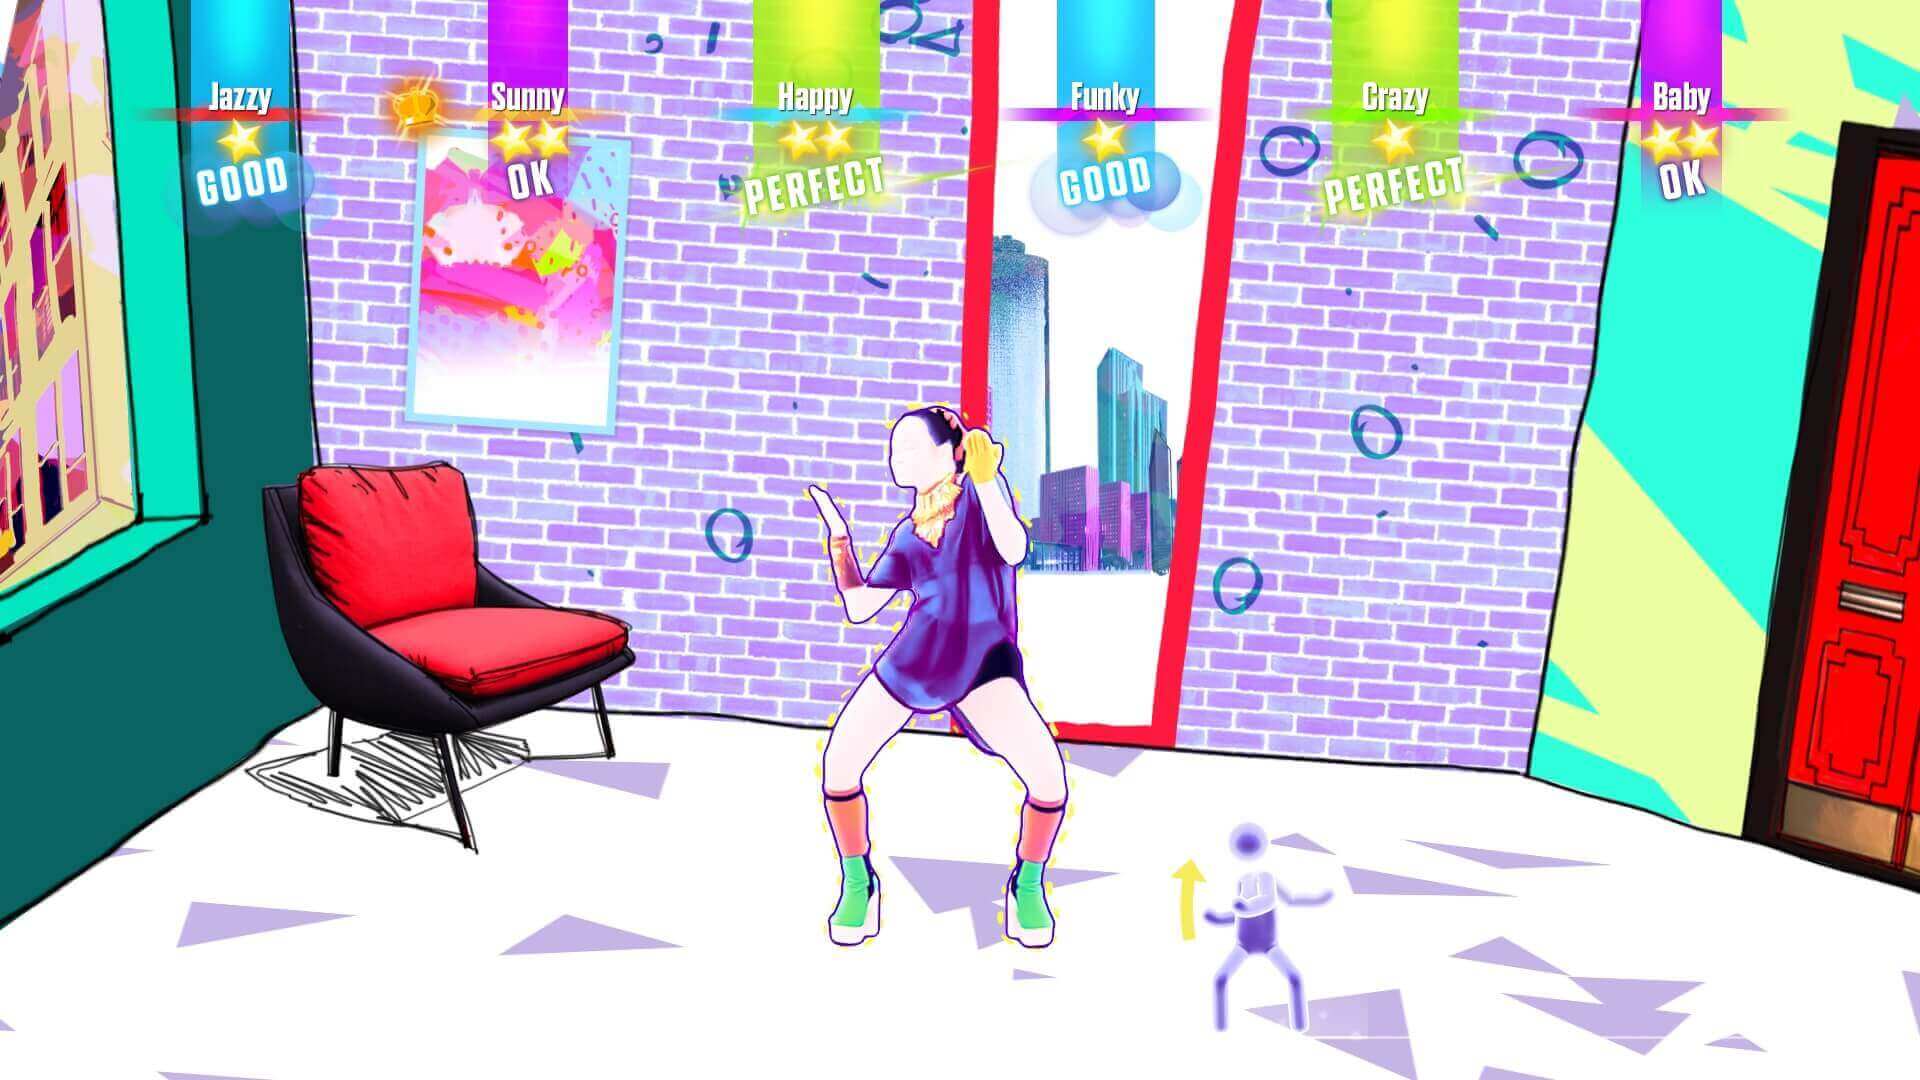 Just dance pc free download